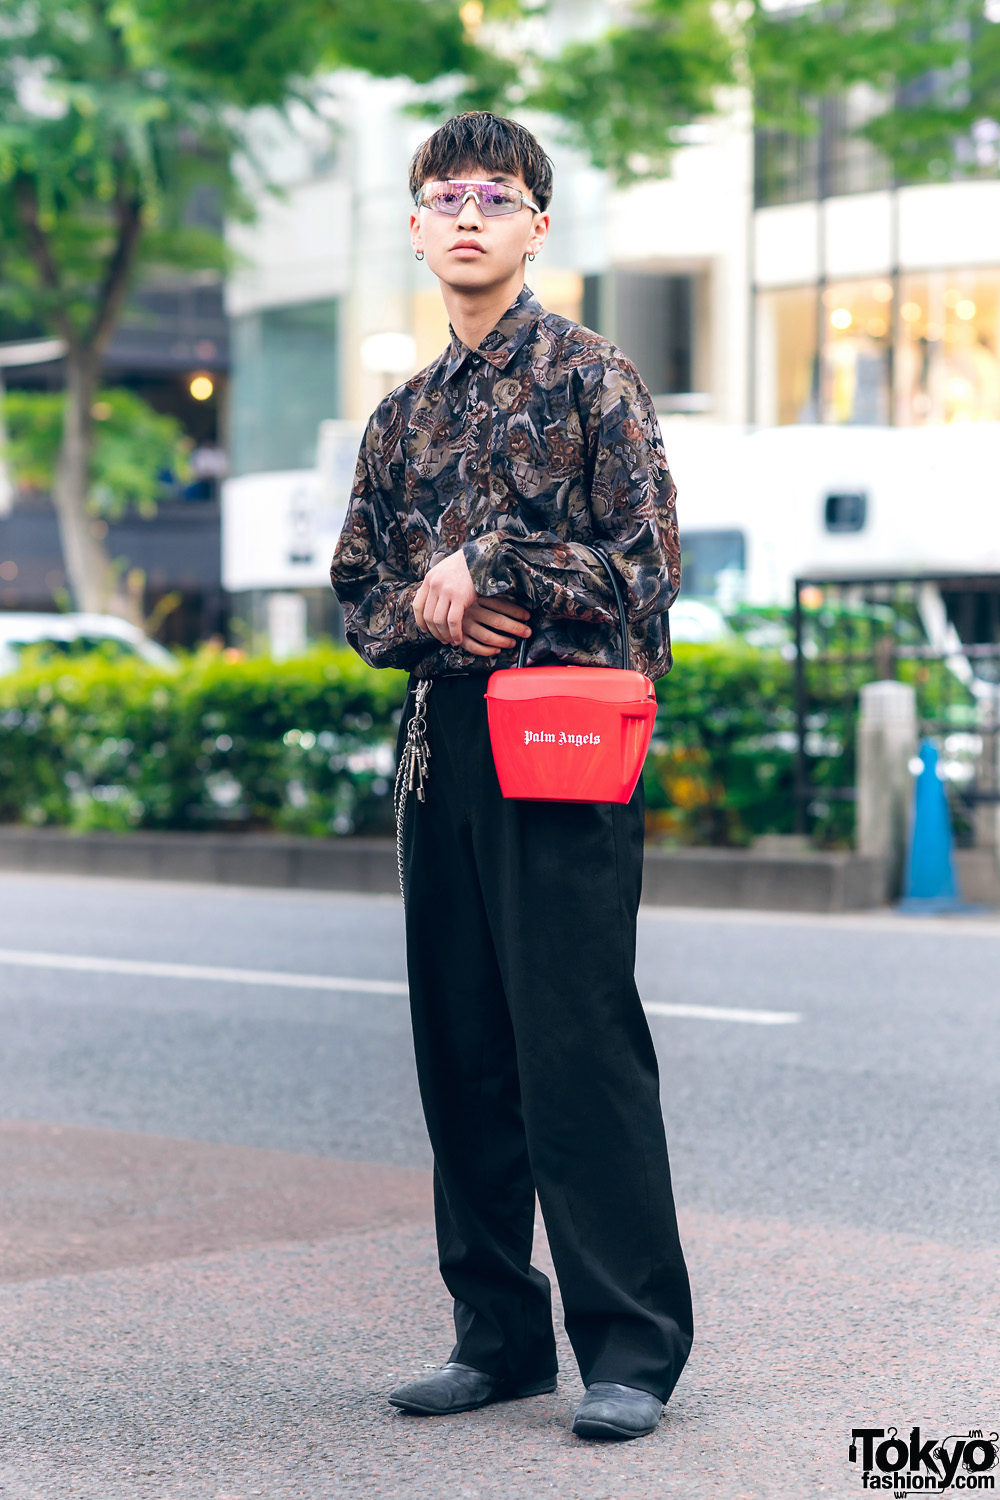 Harajuku Street Style w/ Visor Glasses, Floral Shirt, Comme des Garcons, Undercover, Palm Angels Bag & Paul Smith